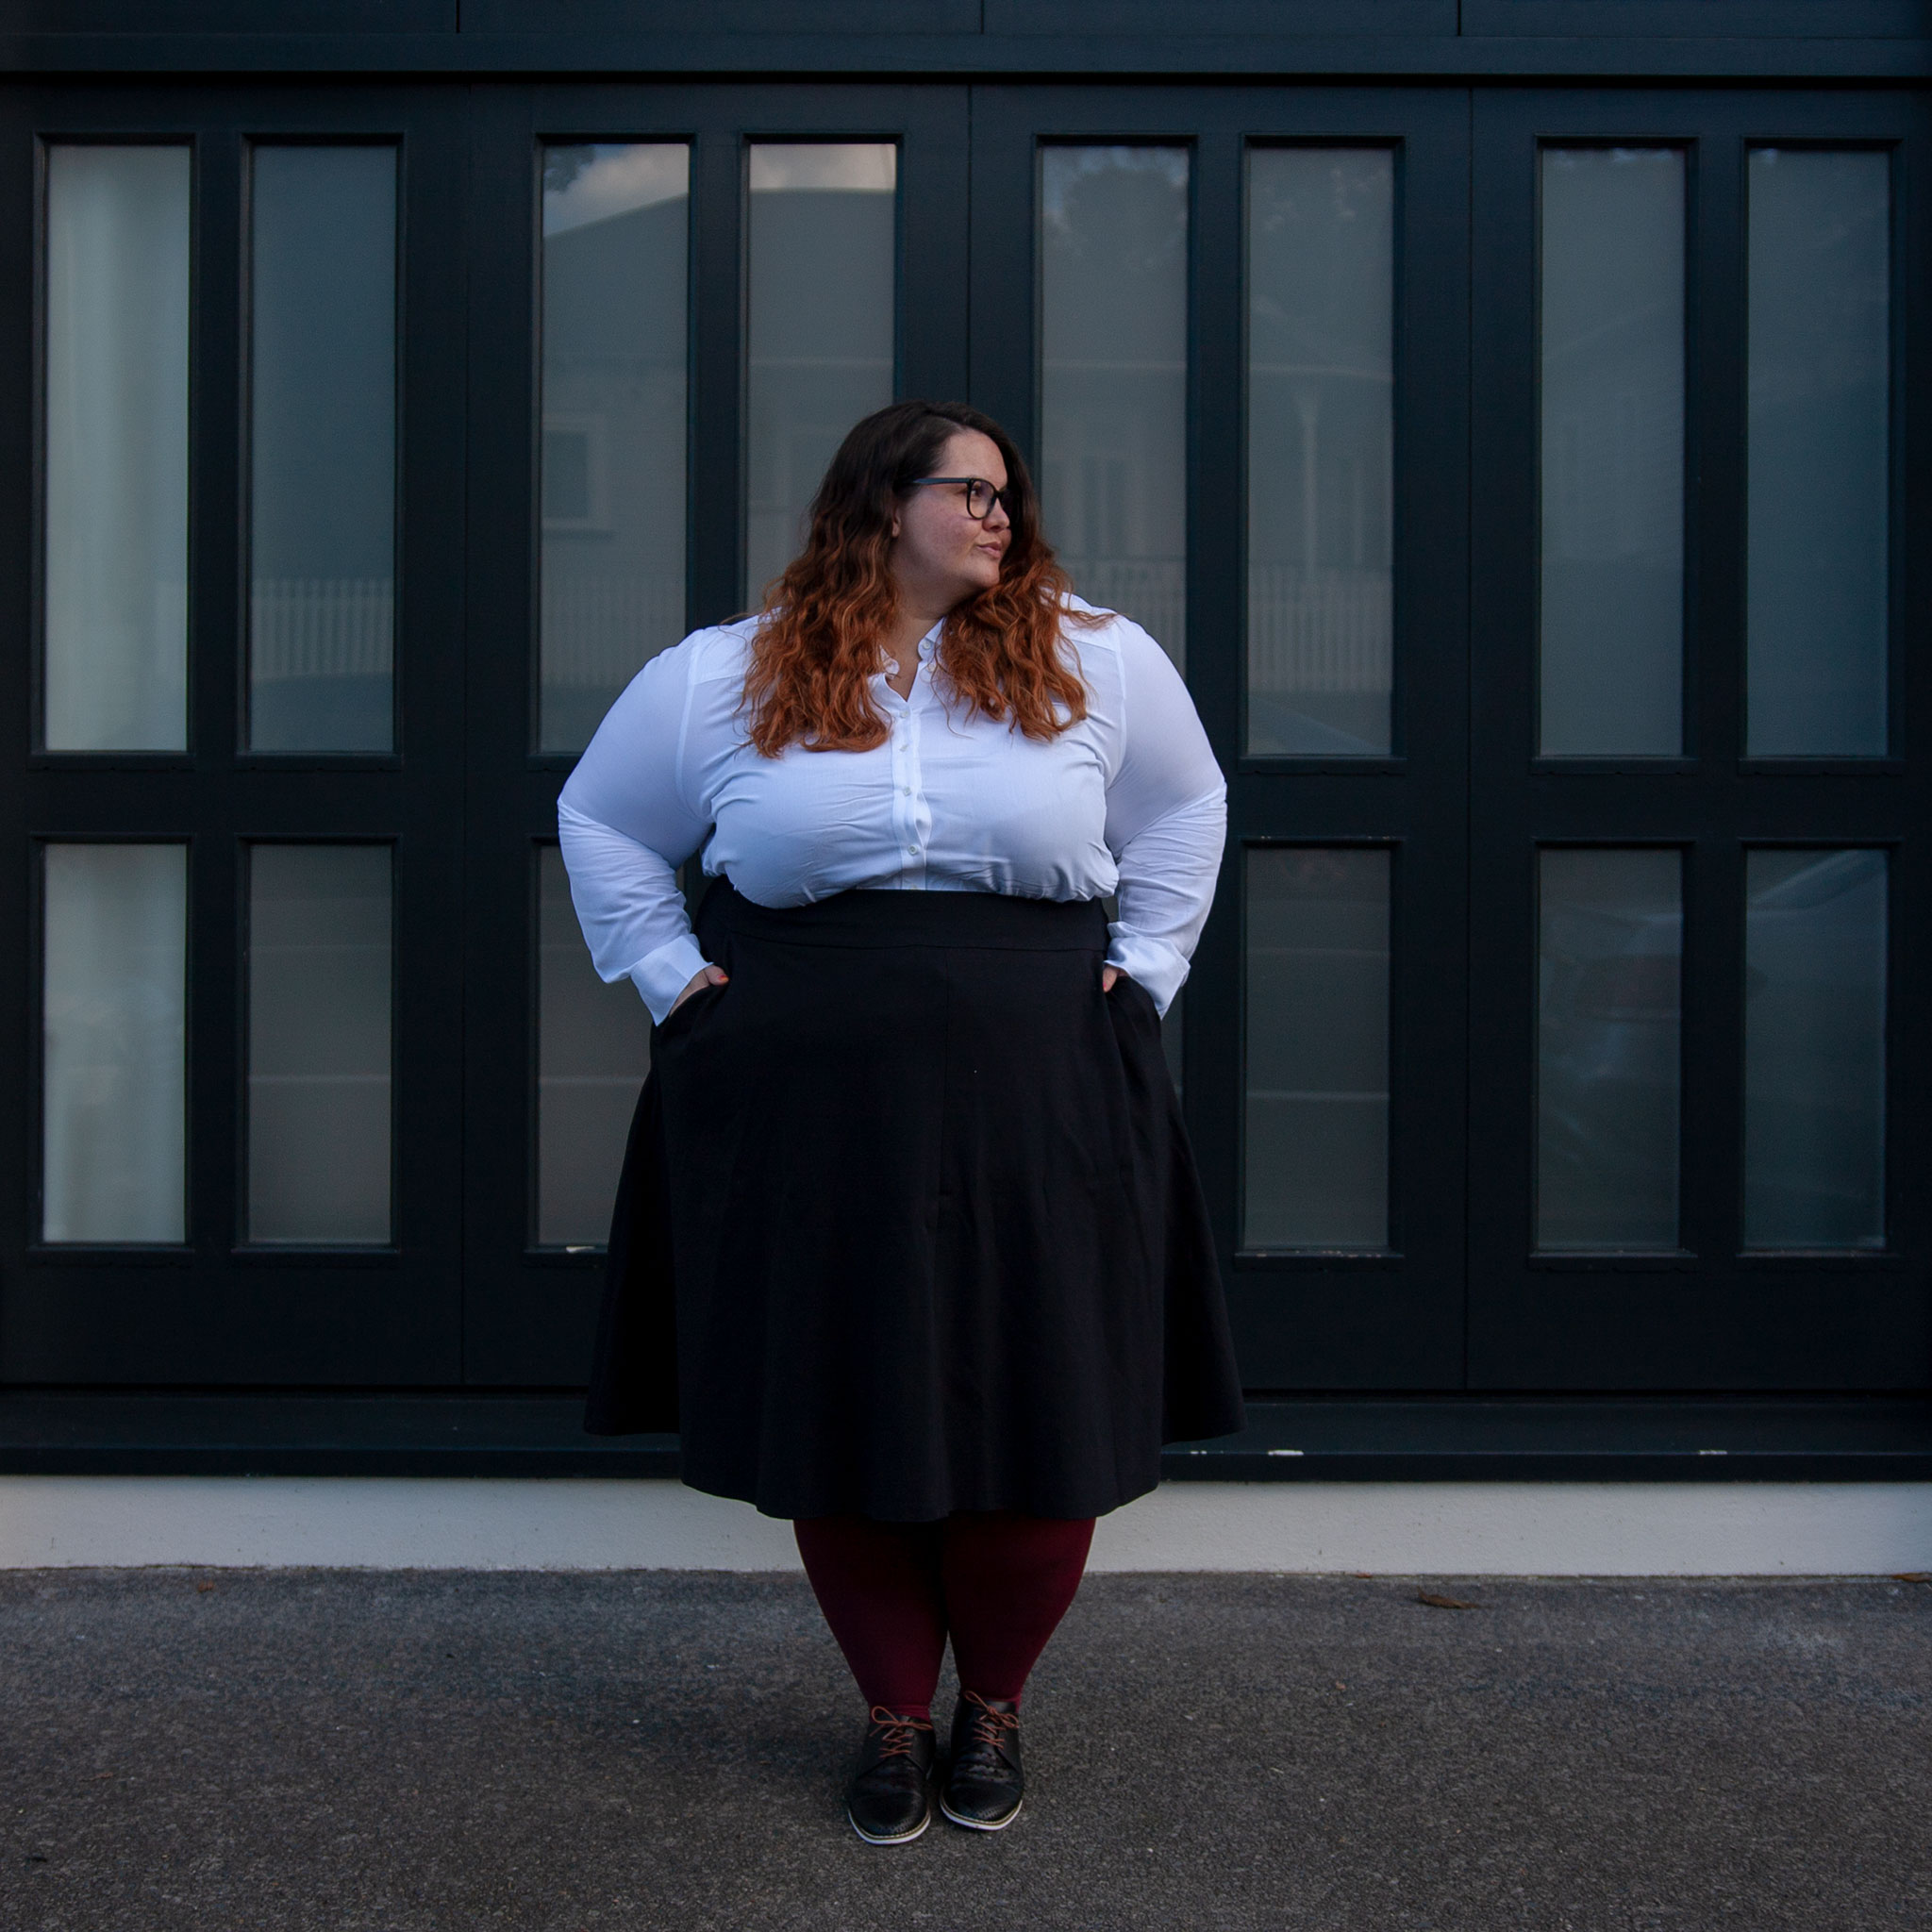 New Zealand plus size blogger Meagan Kerr wears 17 Sundays Basic Longline White Button Up Shirt, Lane Bryant Ponte Circle Skirt, Pamela Mann 90 Denier Maxi Opaque Plus Size Tights from The Tight Spot, Emerge Anaheim Cut-out Lace Up Court Flat from EziBuy, Alexa Glasses from Specsavers. Photo by Doug Peters / Ambient Light